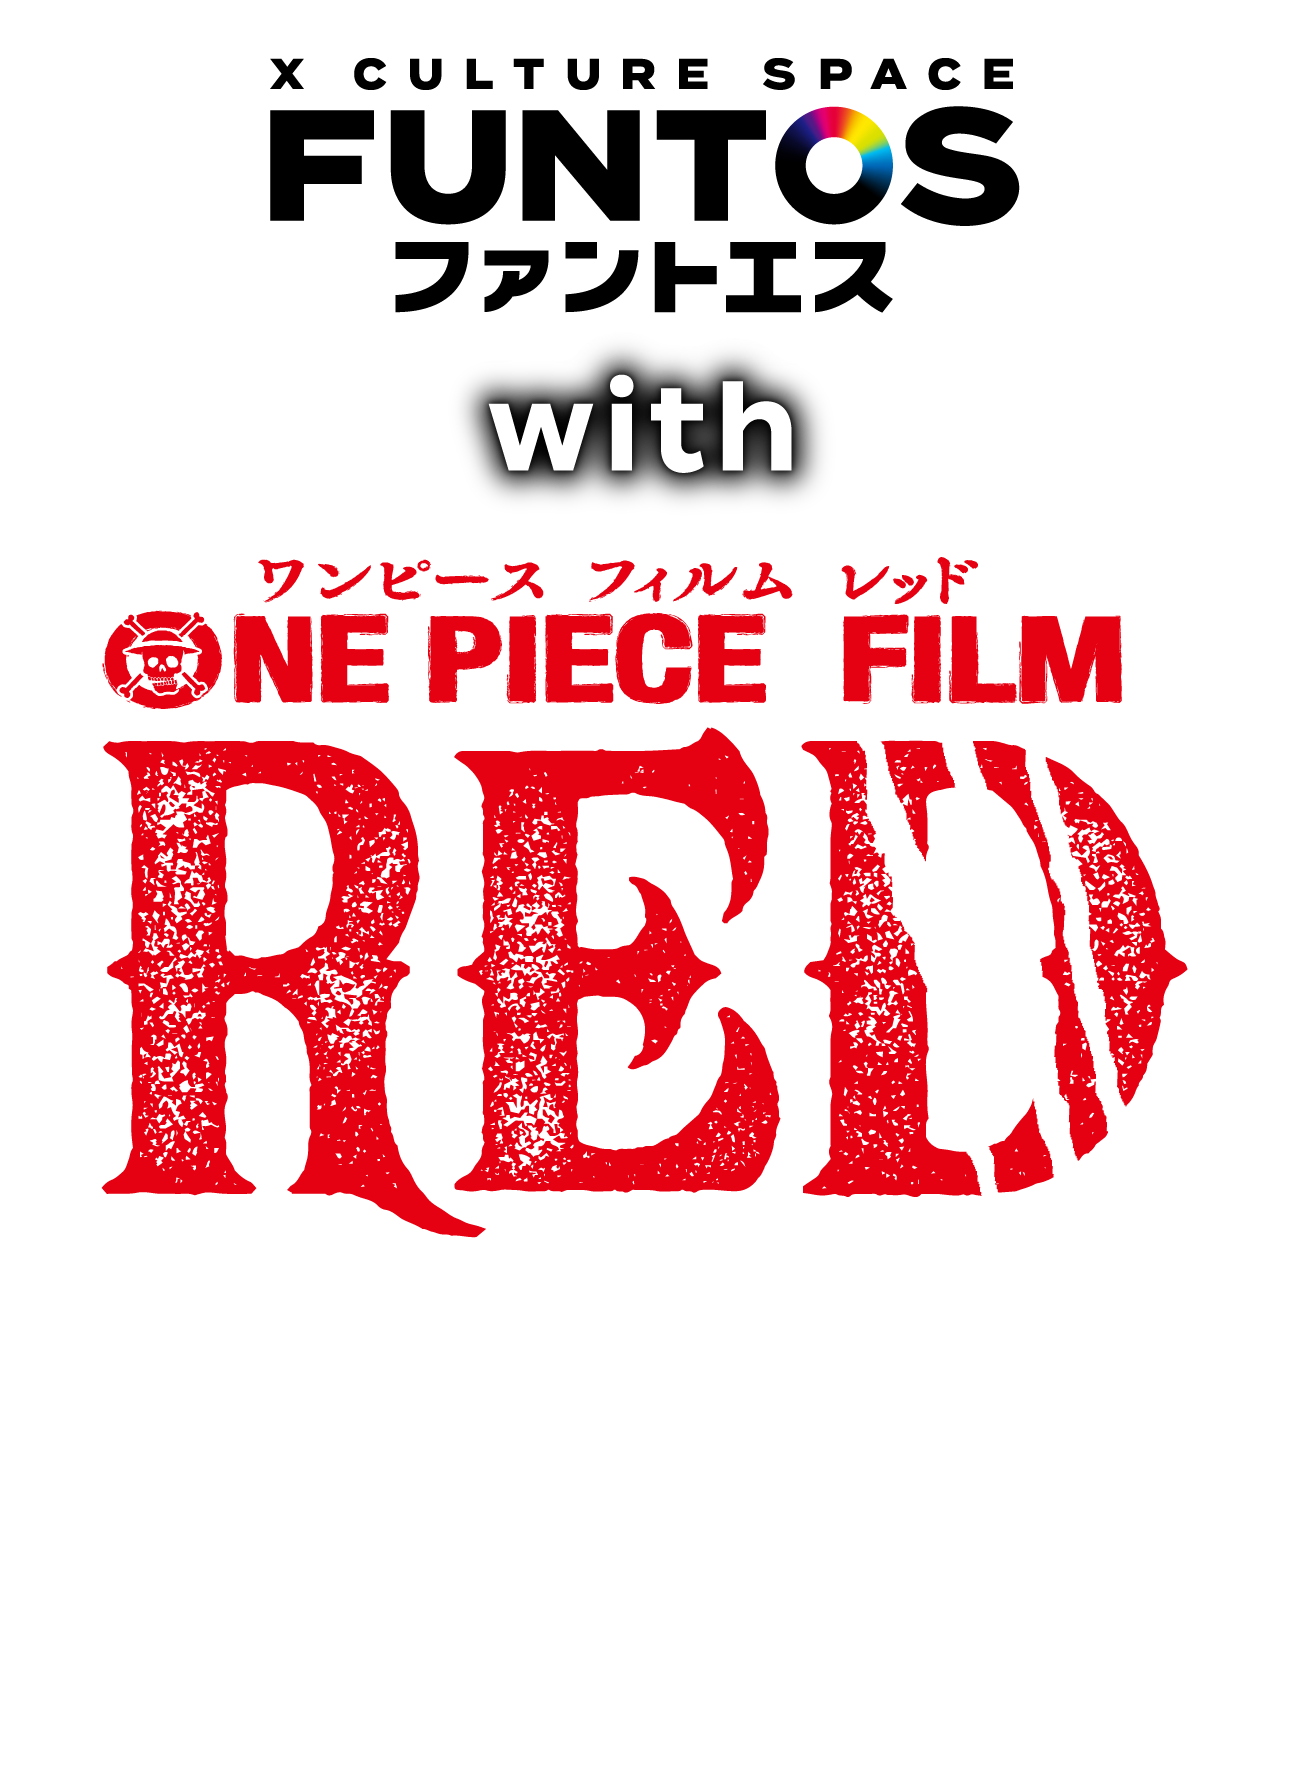 FUNTOS with ONE PIECE FILM RED